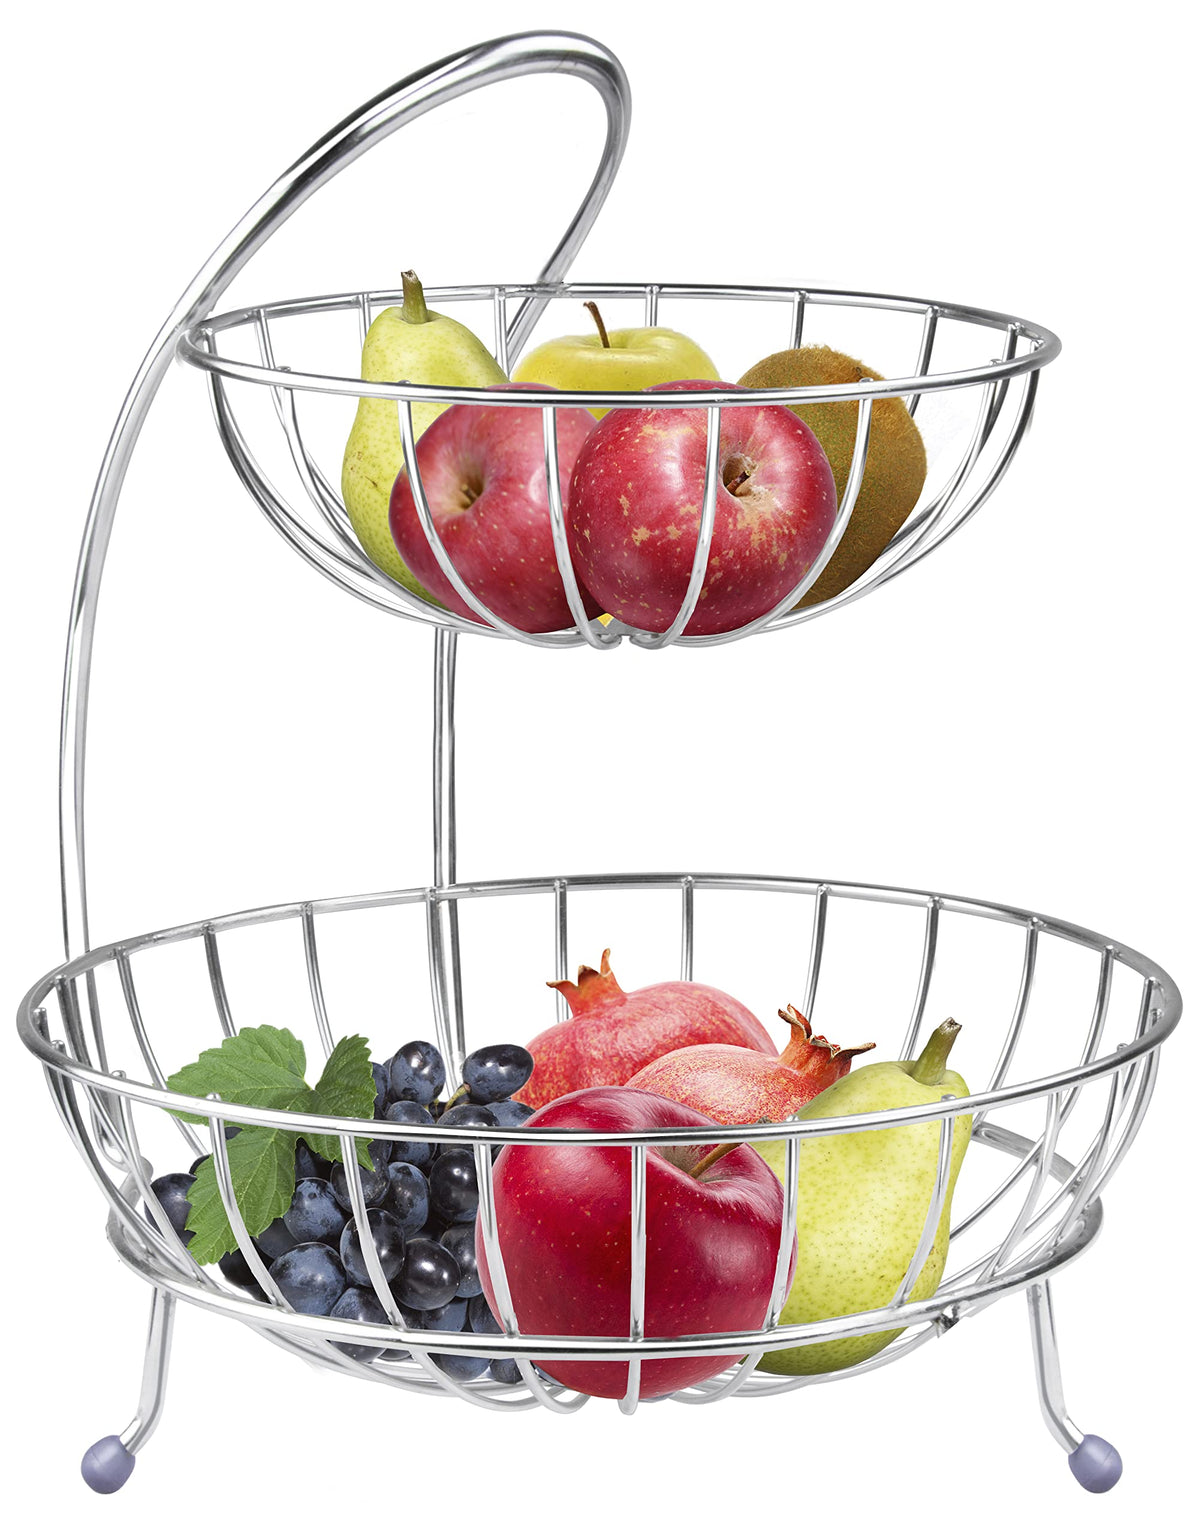 Plantex Stainless Steel 2-Tier Fruit & Vegetable Basket for Dining Table/Kitchen - Countertop (Chrome)